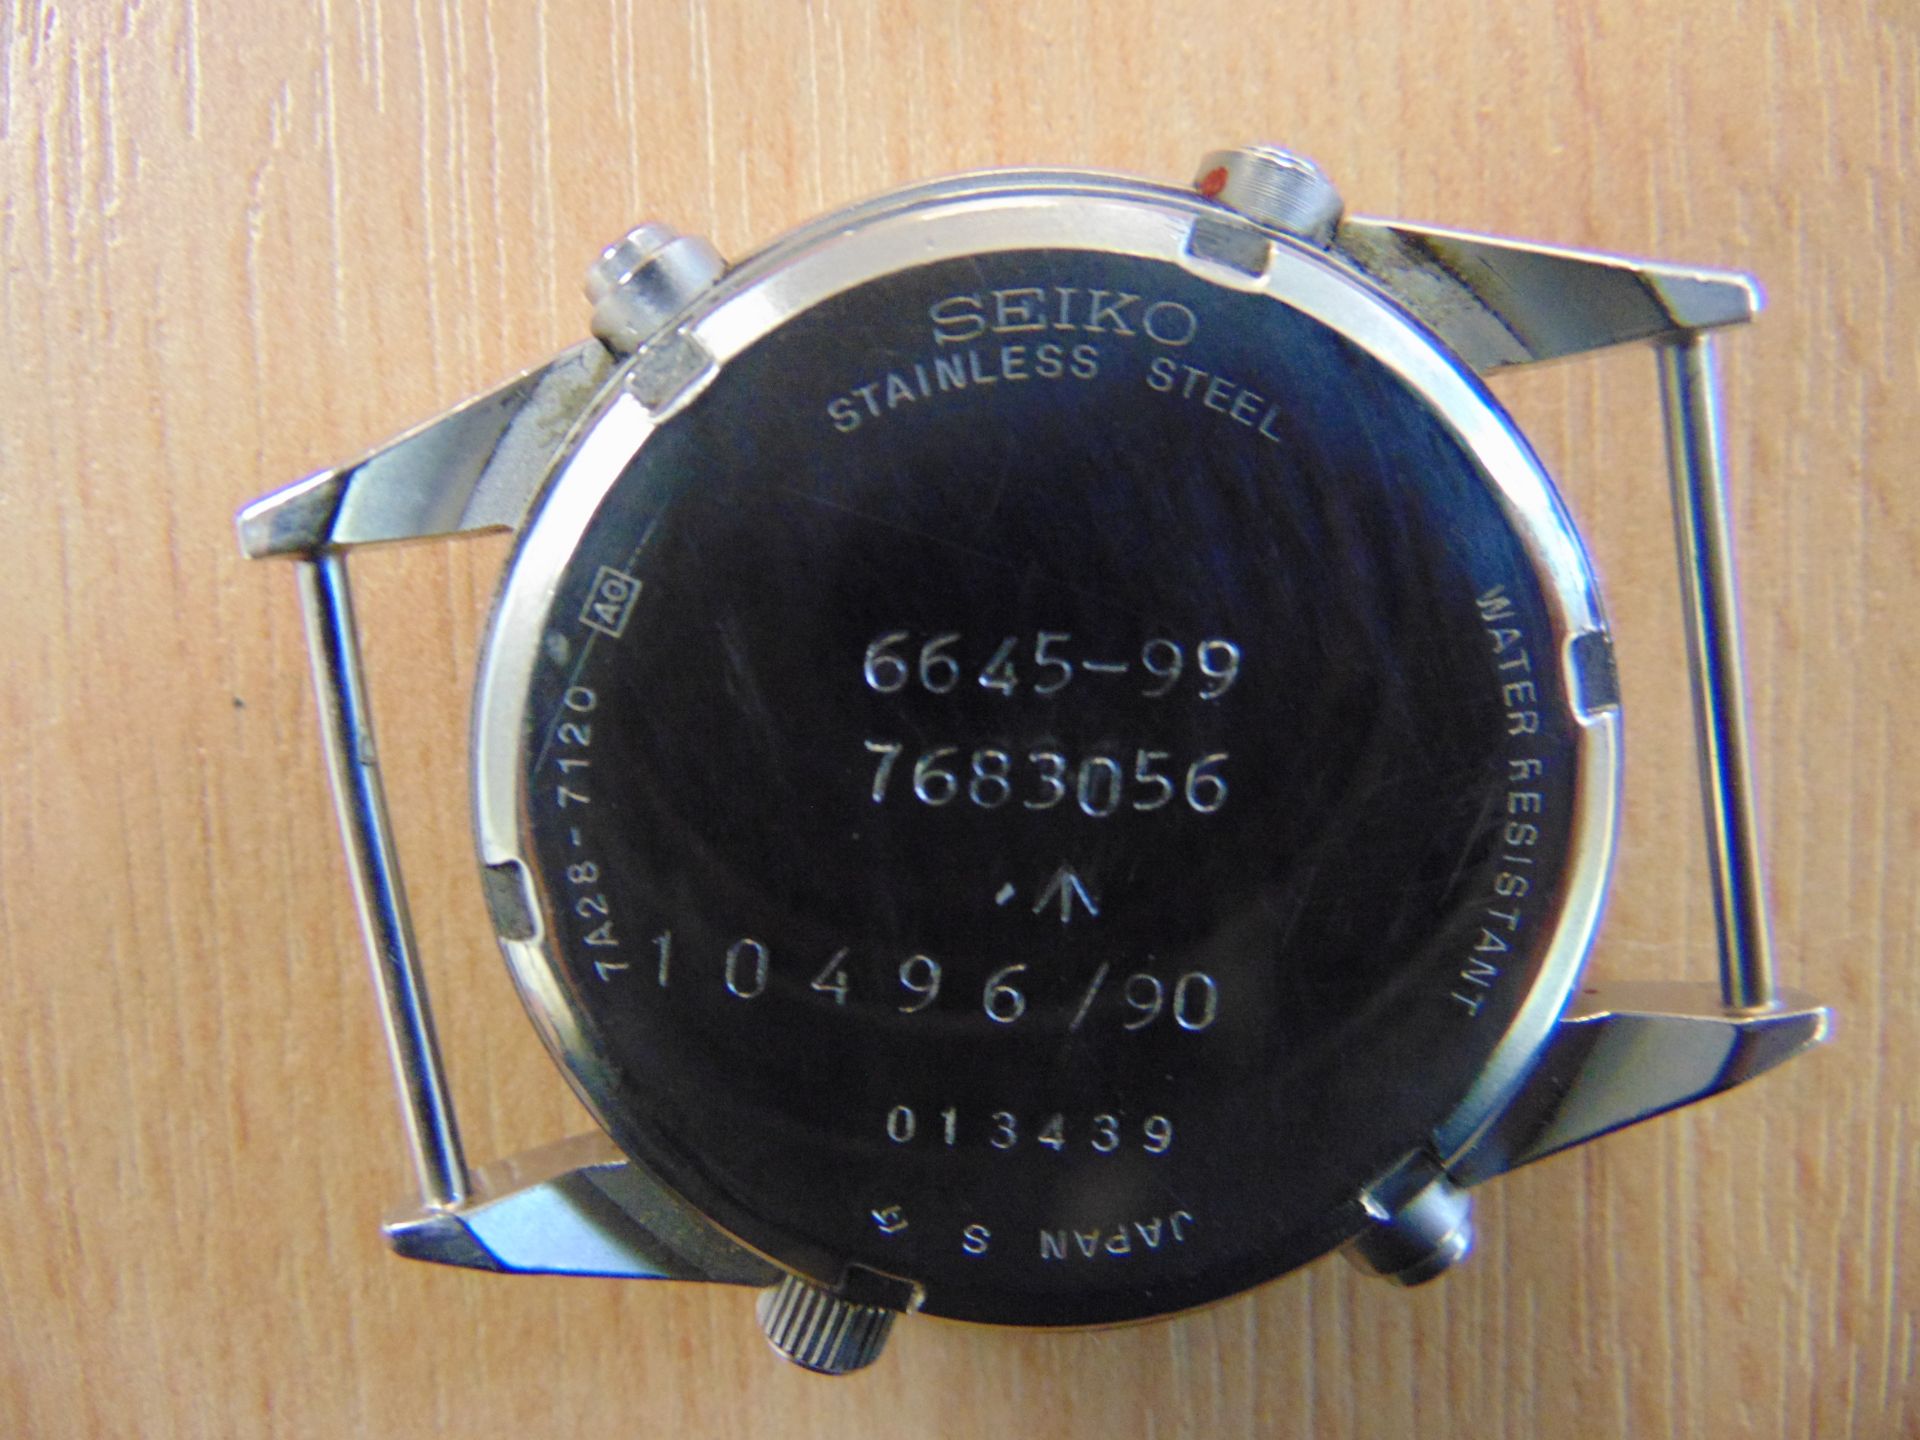 SEIKO GEN 1 PILOTS CHRONO RAF ISSUE Watch NATO MARKINGS DATED 1990 - Image 6 of 10